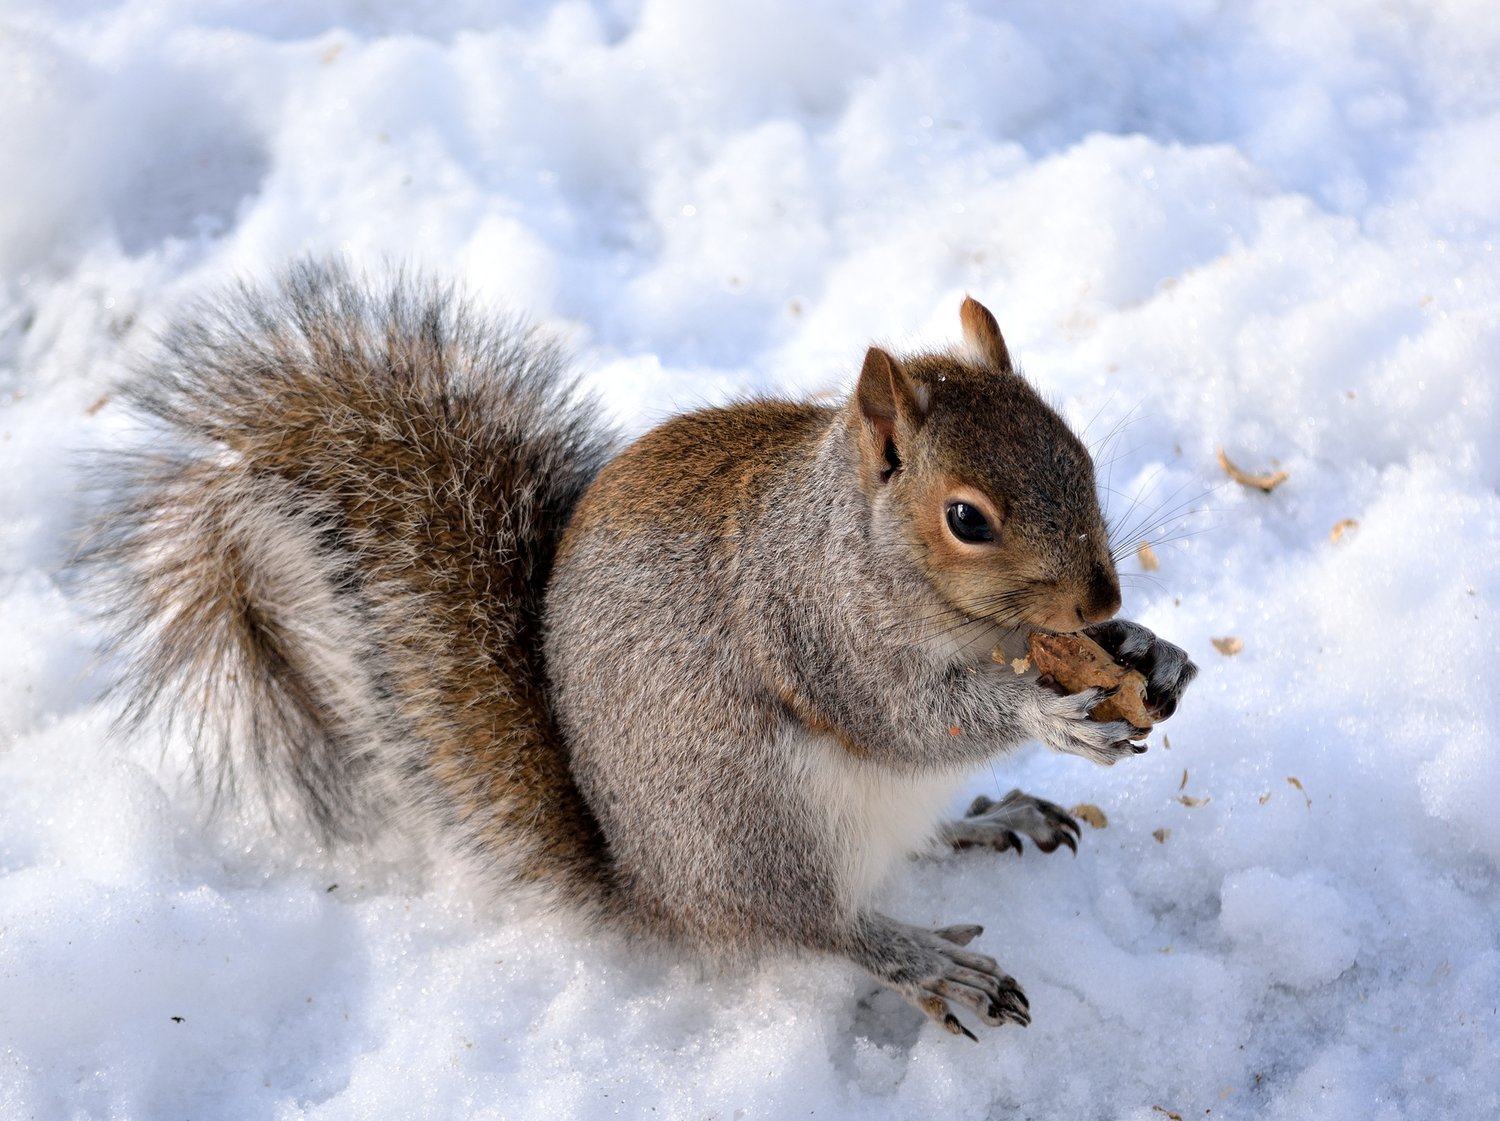 Grey Squirrel standing on the snow eating a nut.